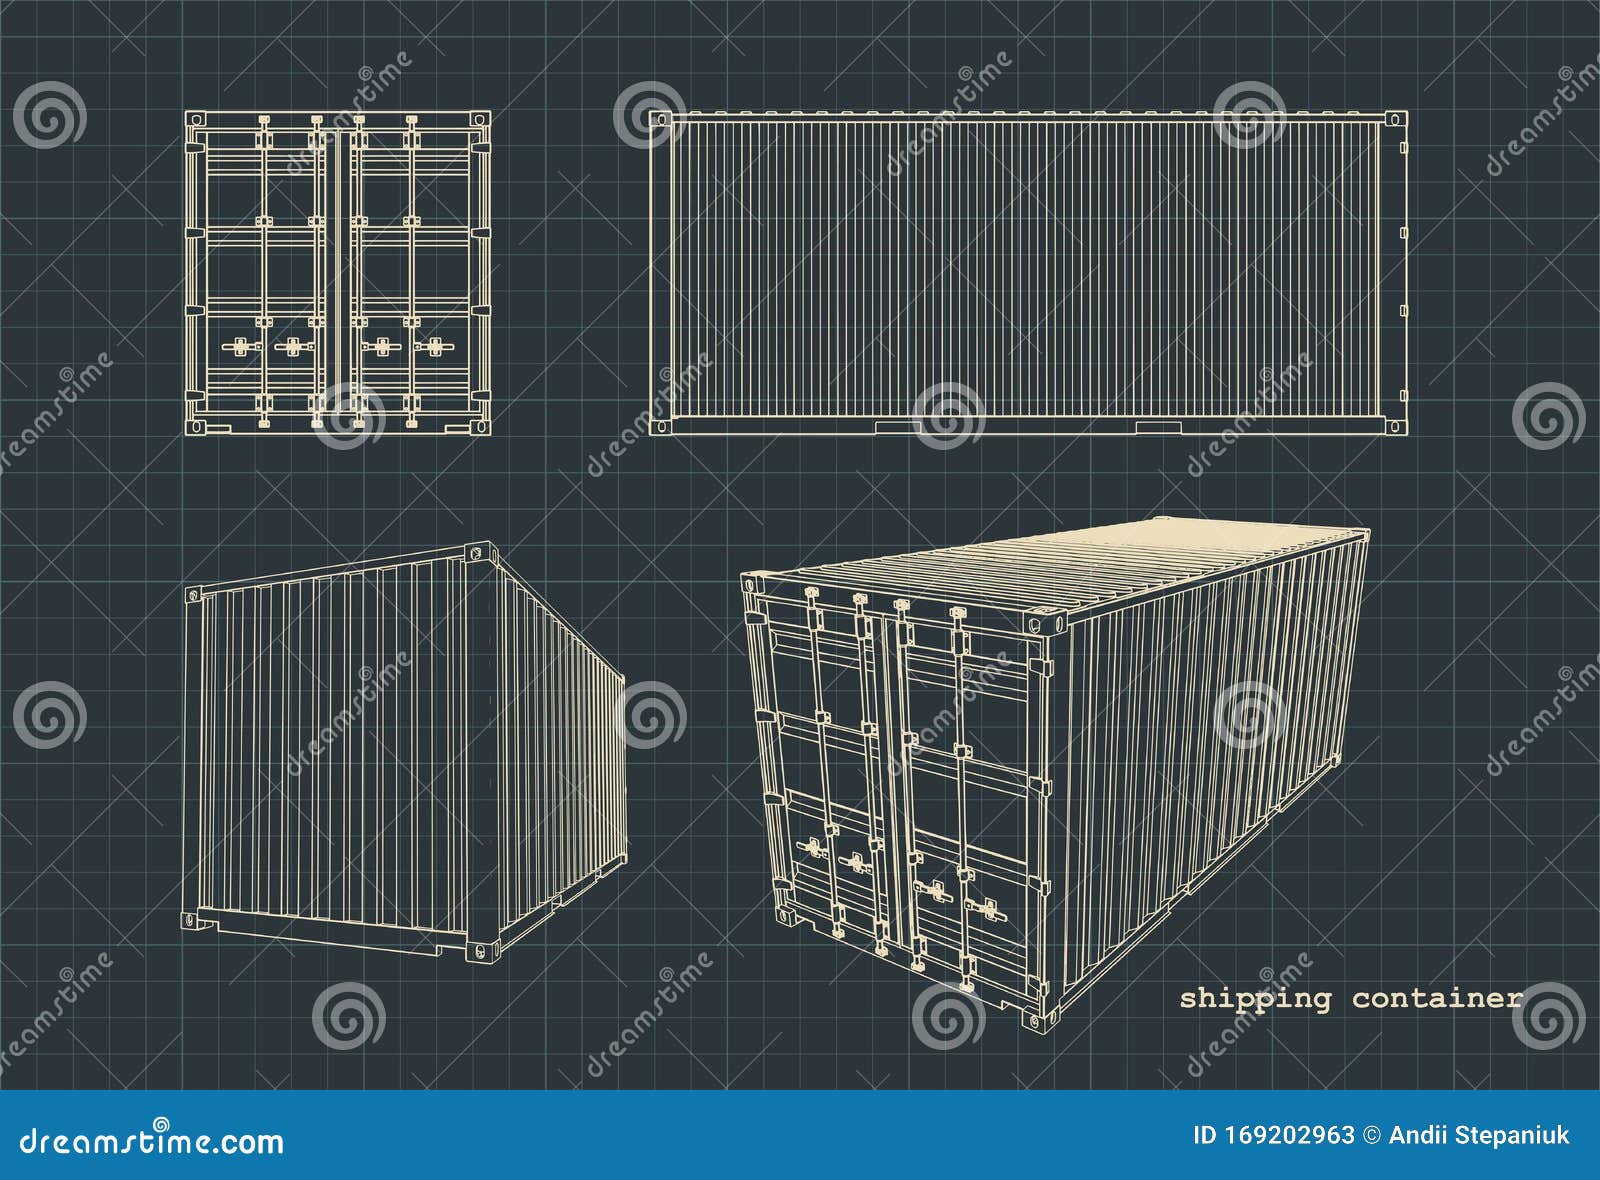 shipping container drawings